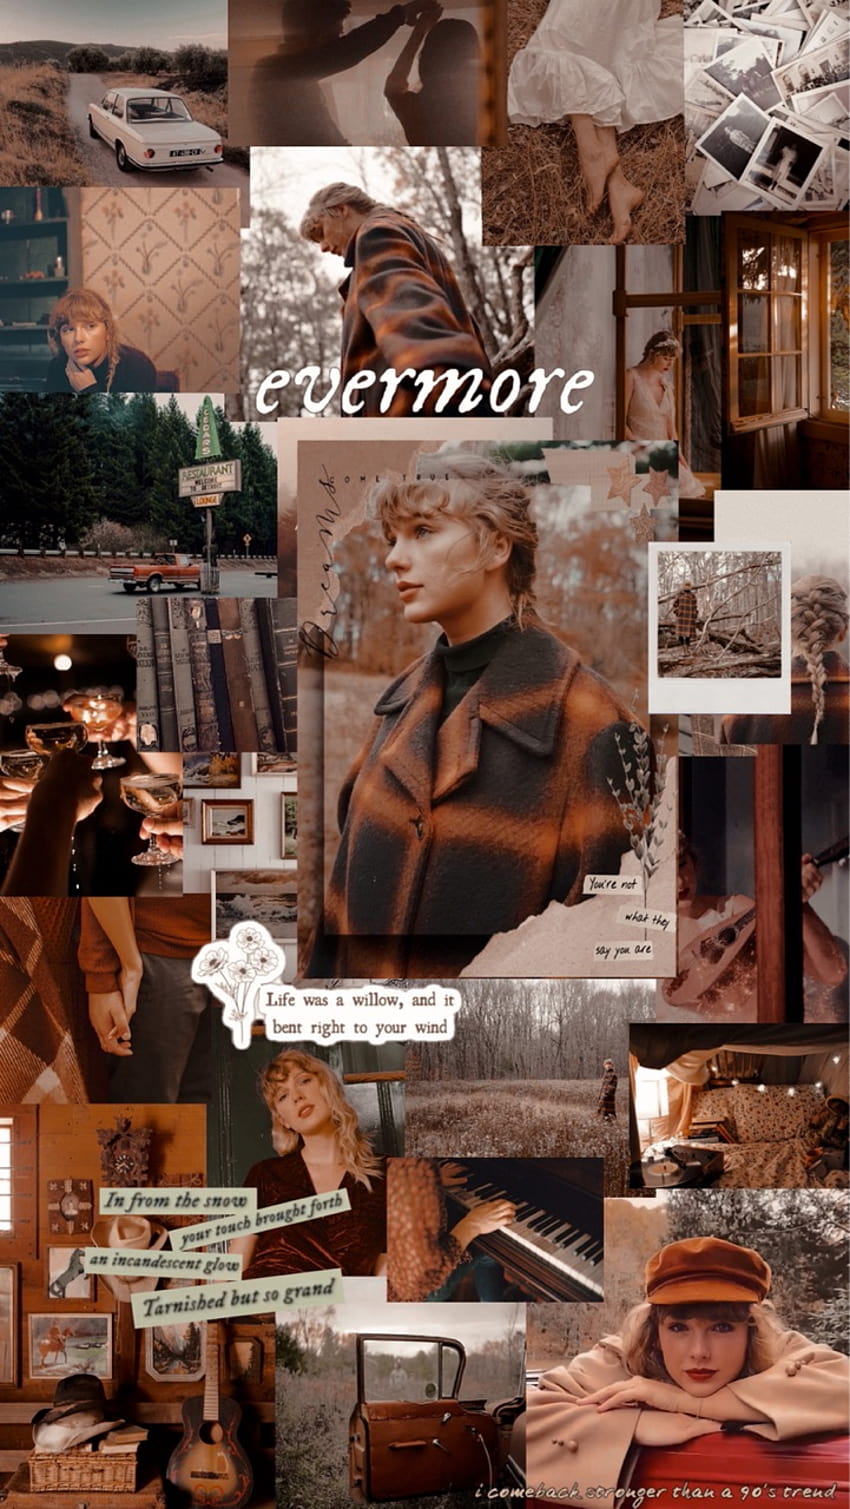 Taylor Swift Evermore Aesthetic uploaded by ✮ b e c c a, taylor swift collage HD phone wallpaper